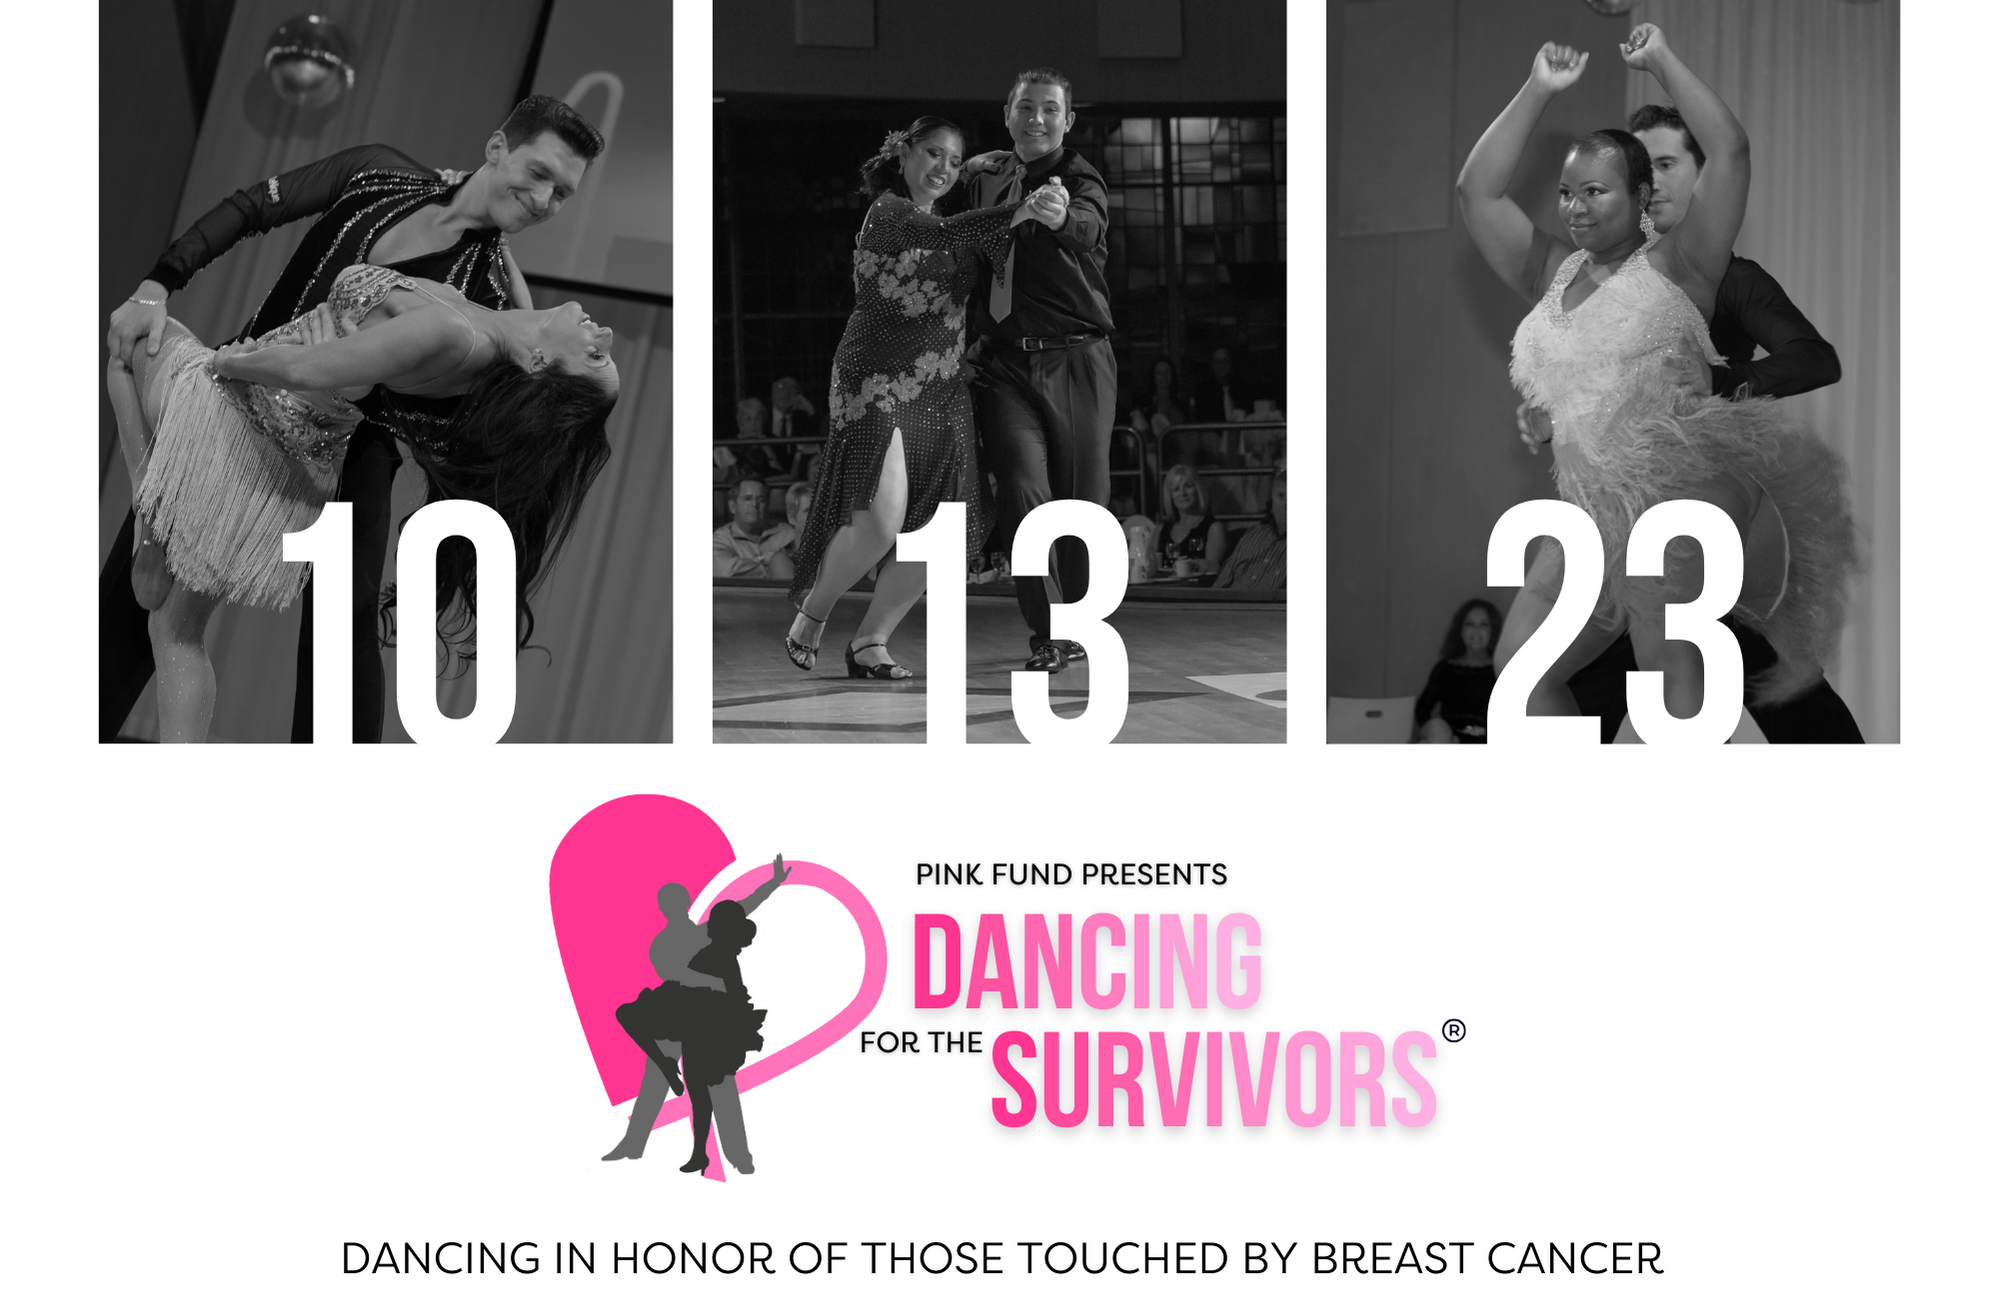 Pink Fund presents Dancing For The Survivors on 10/13/23